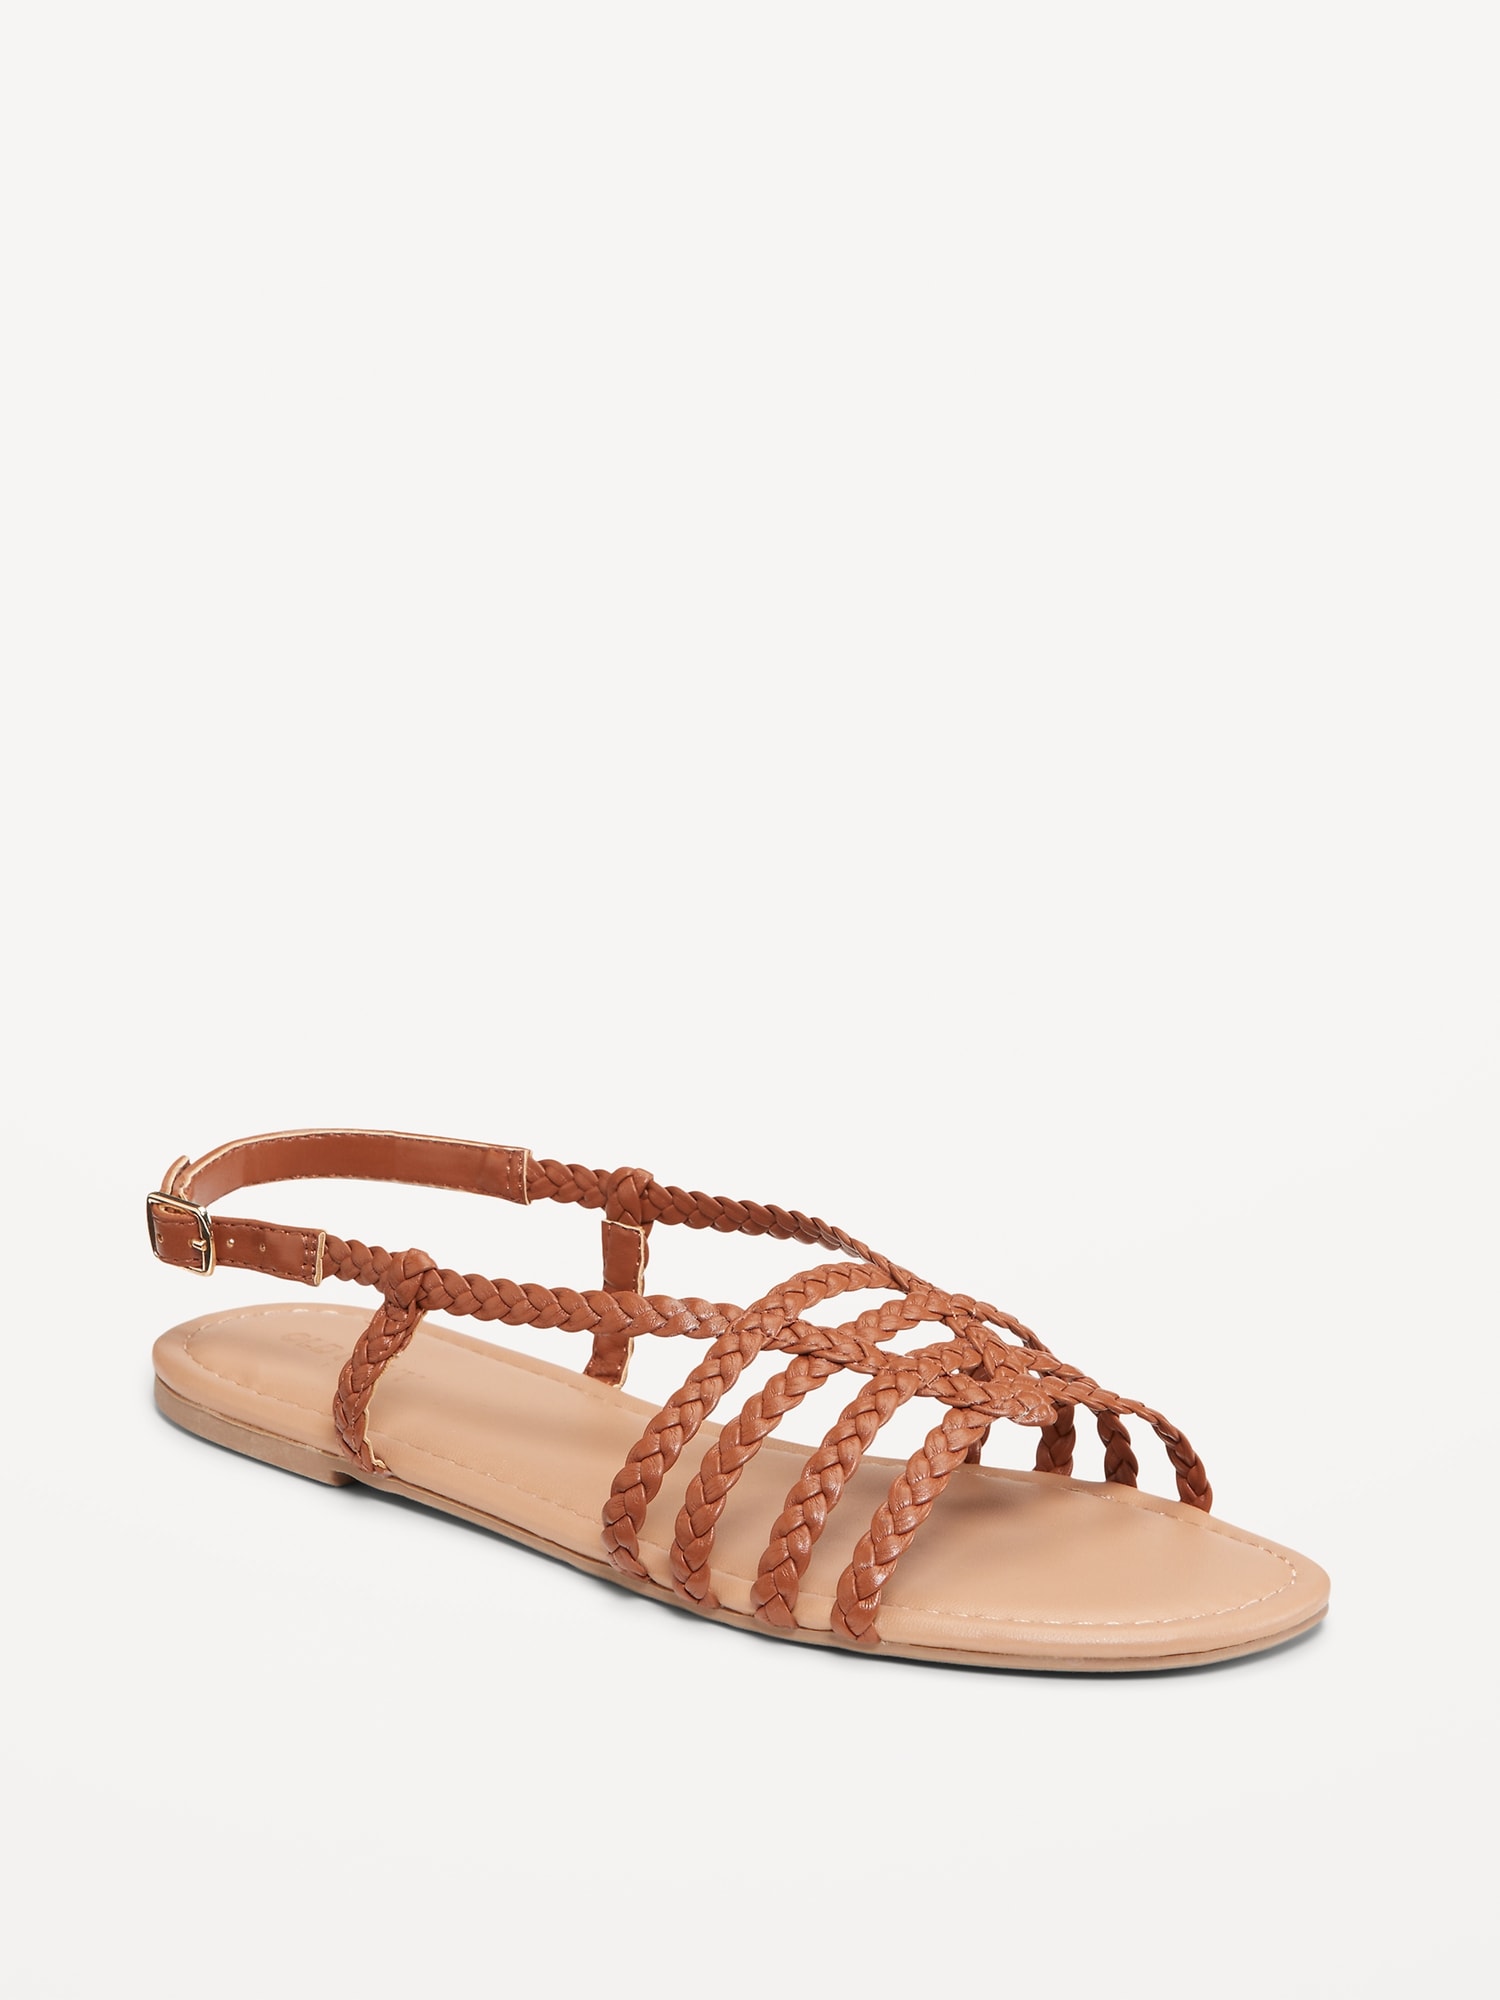 Faux-Leather Braided Flat Sandals